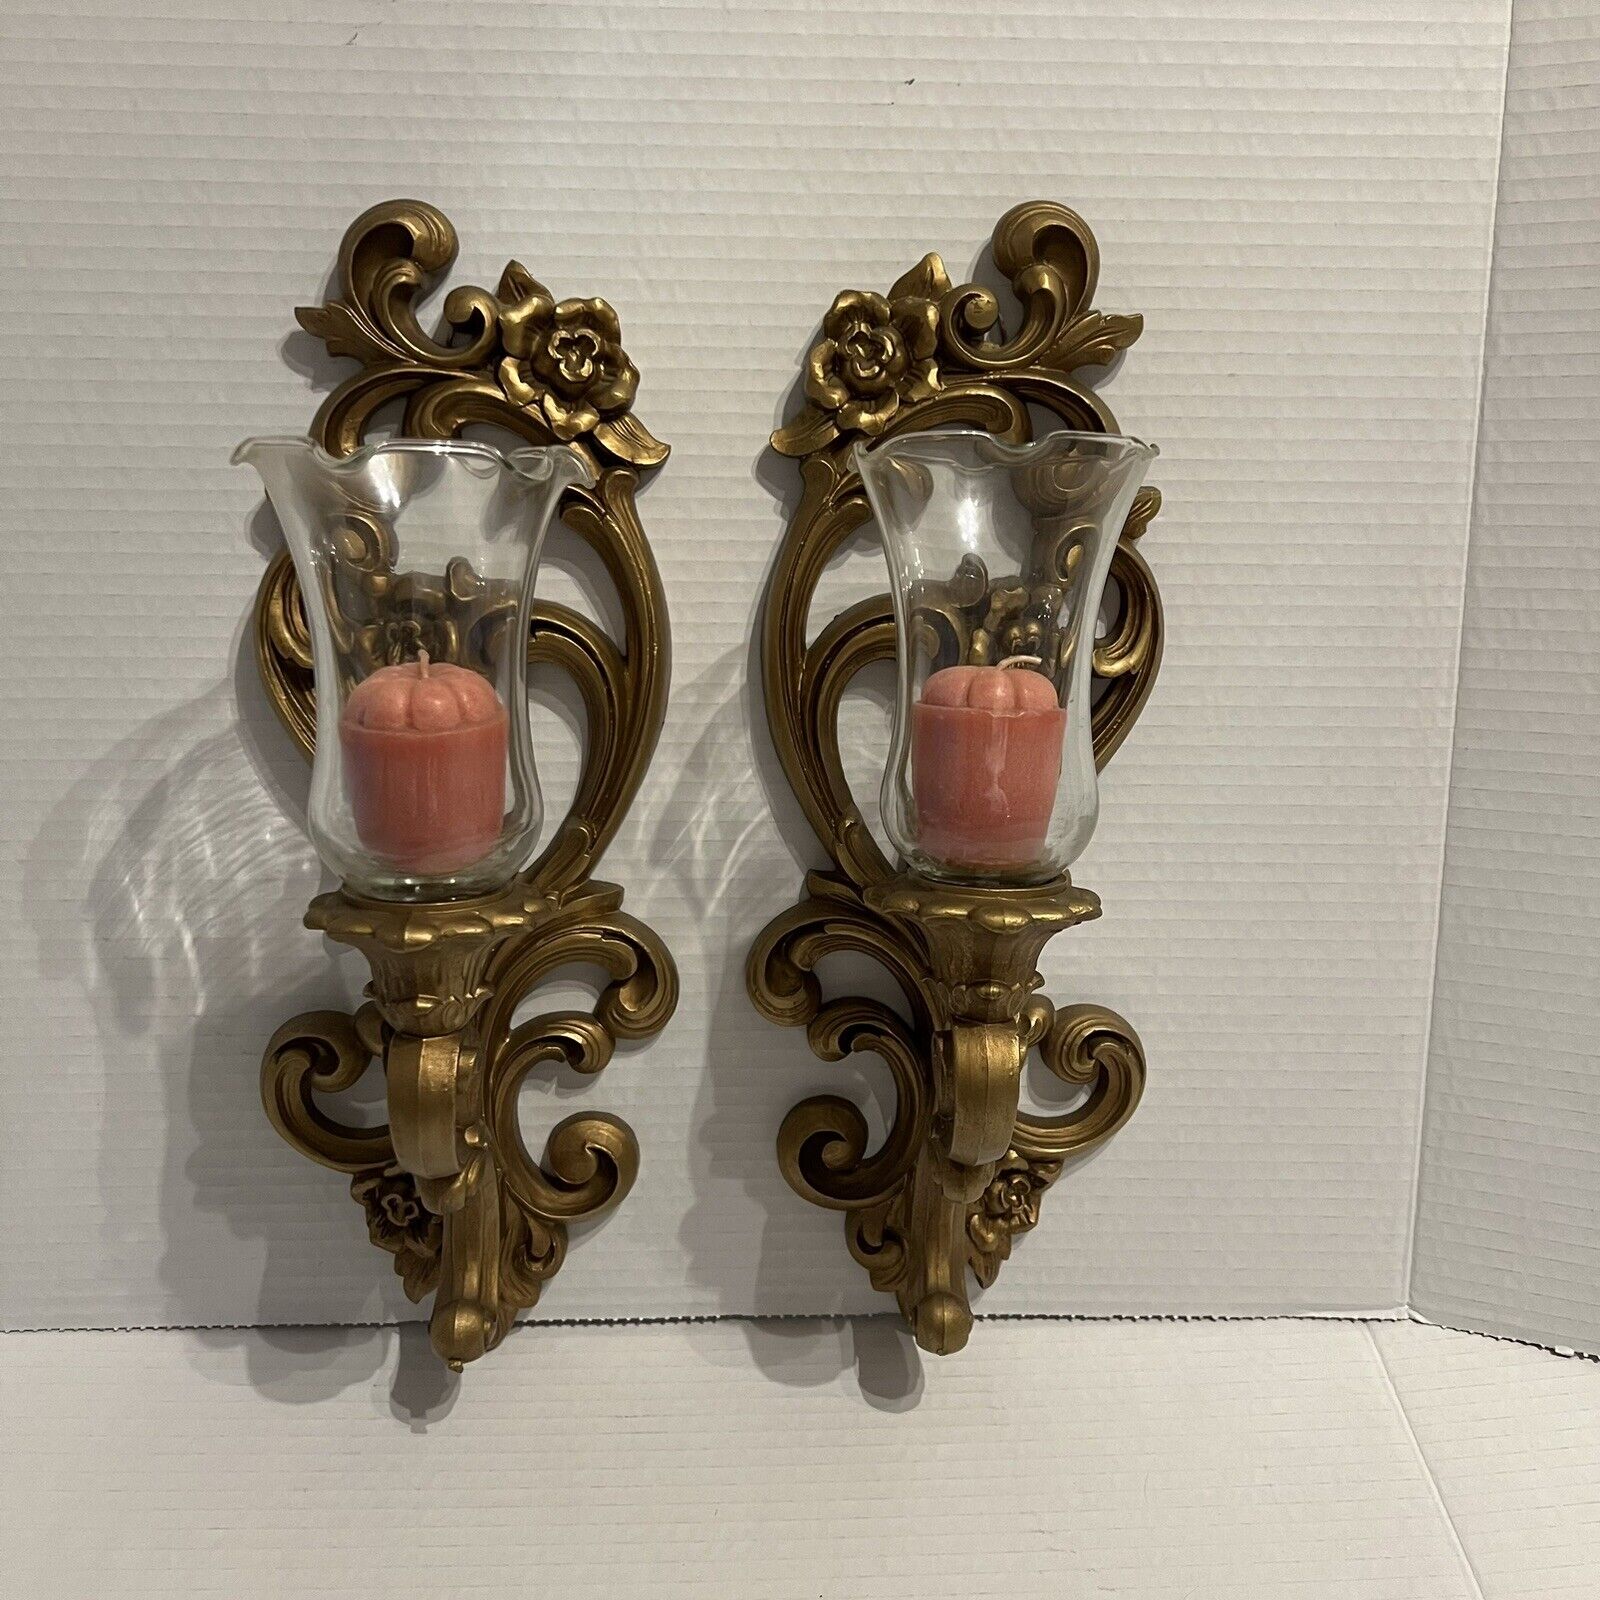 Vintage Pair HOMCO Gold Ornate Wall Sconce Candle Holder #4118 Hollywood Regency